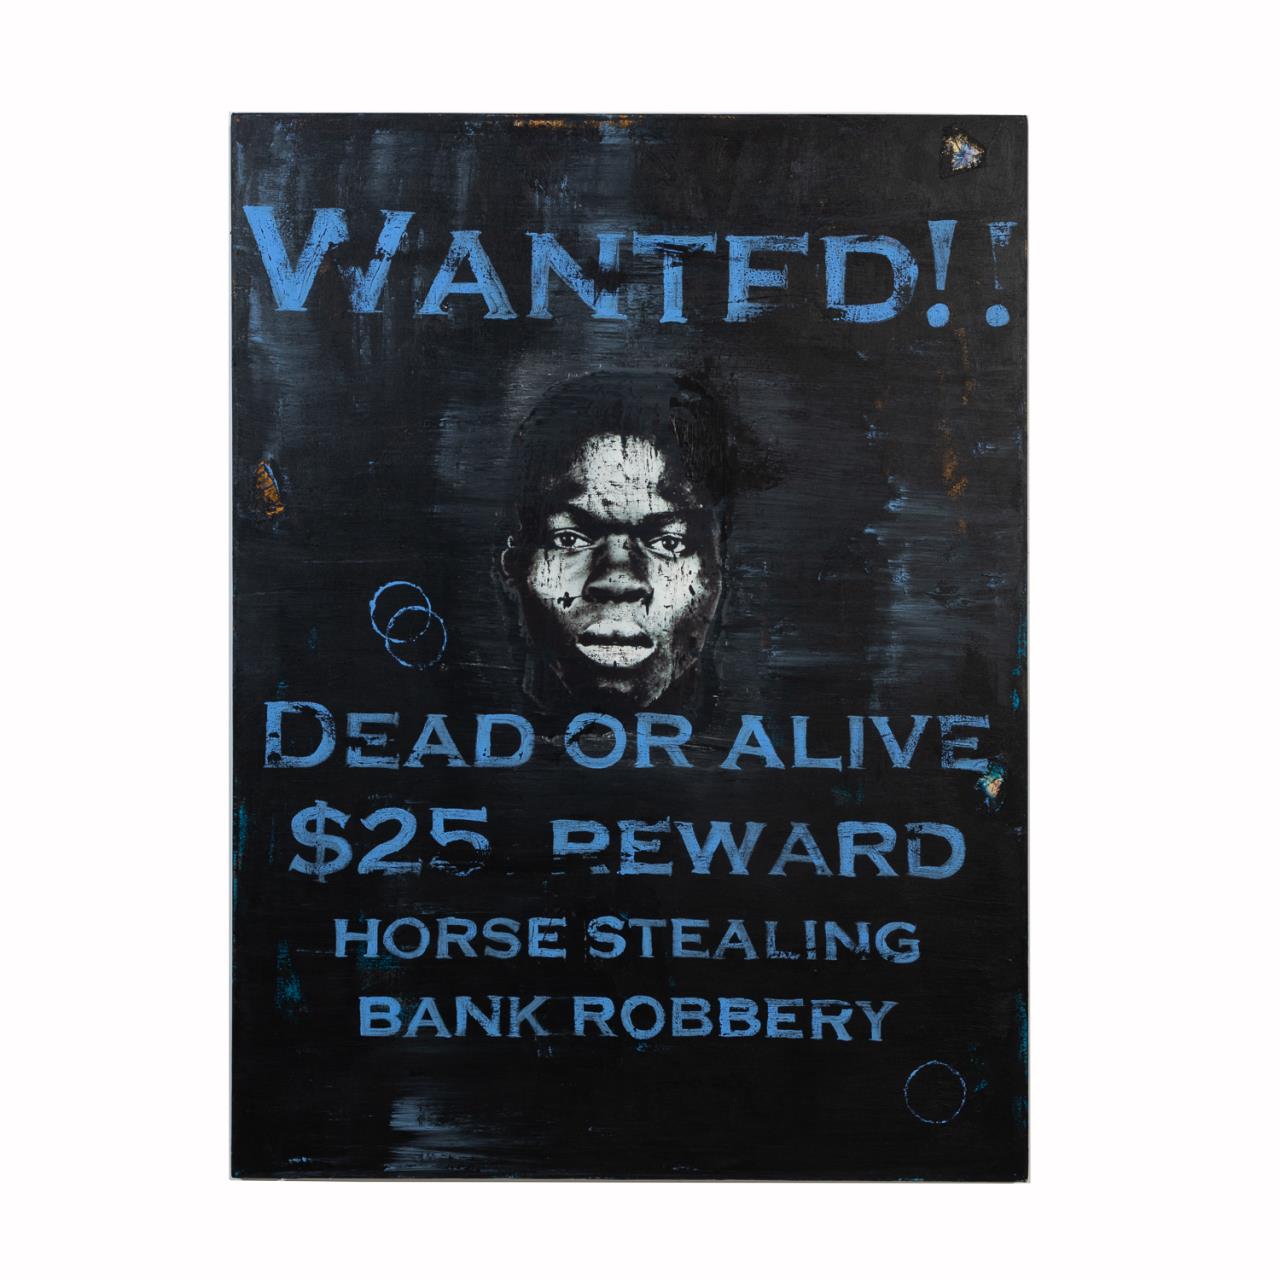 CEDRIC SMITH, "WANTED" DEAD OR